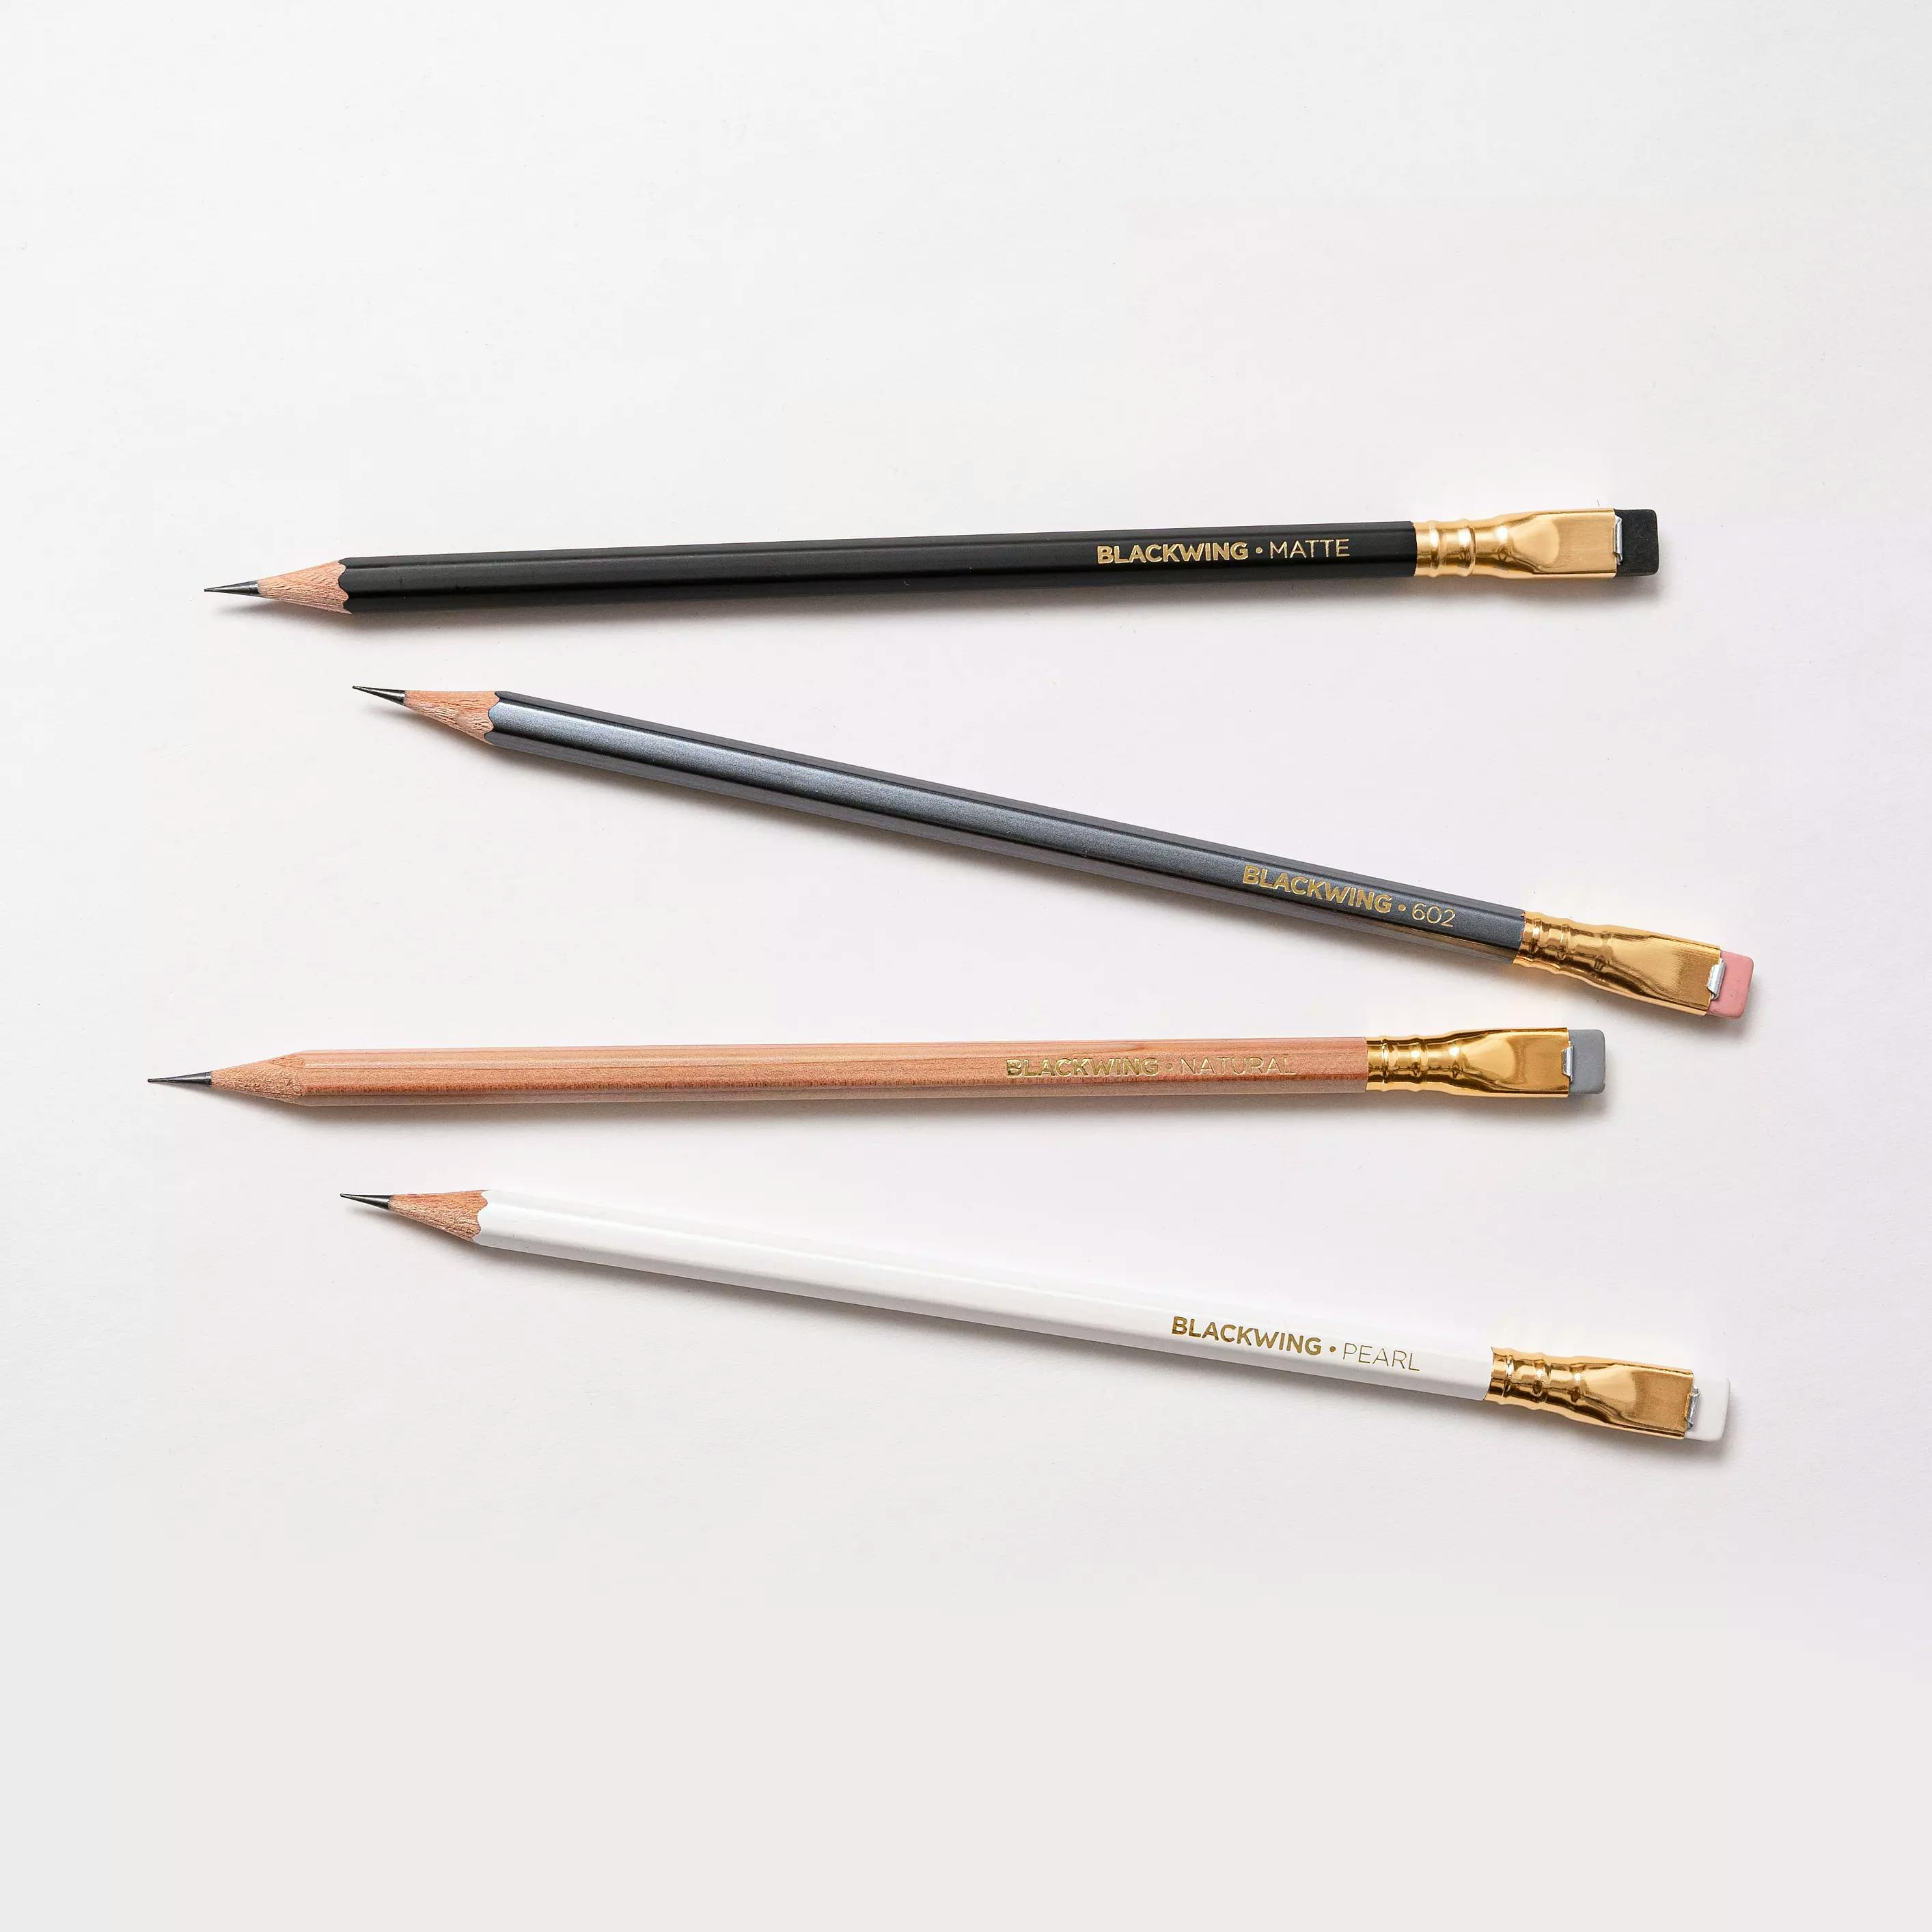 Four Blackwing pencils